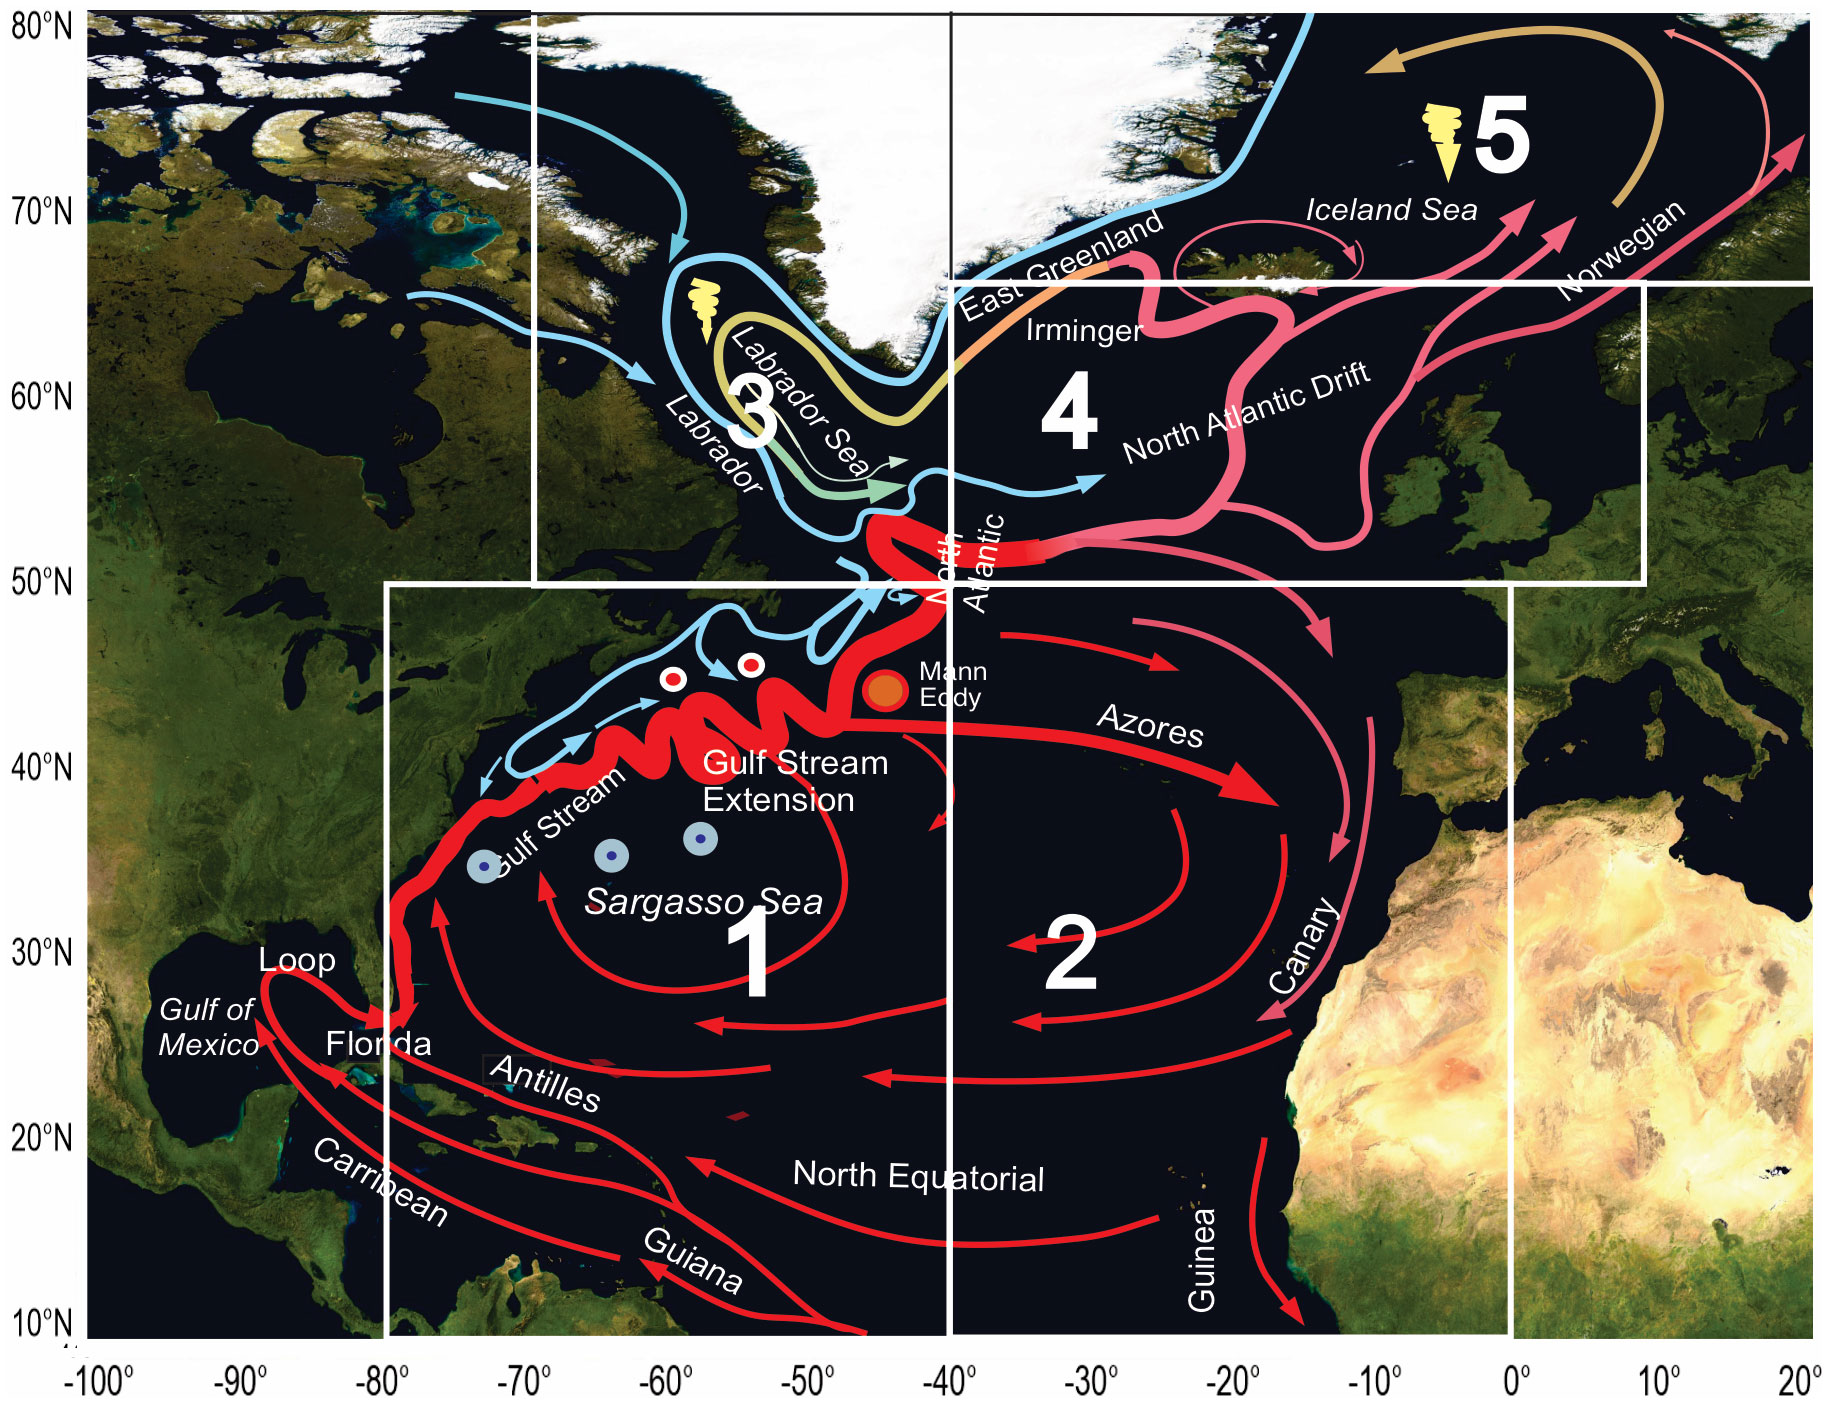 A scheme of the upper-layer circulation of the North Atlantic Ocean. Red – warm currents, blue – cold currents. White boxes 1 to 5 indicate five different areas of analysis where temperature, salinity, and current velocities presumably differ considerably.